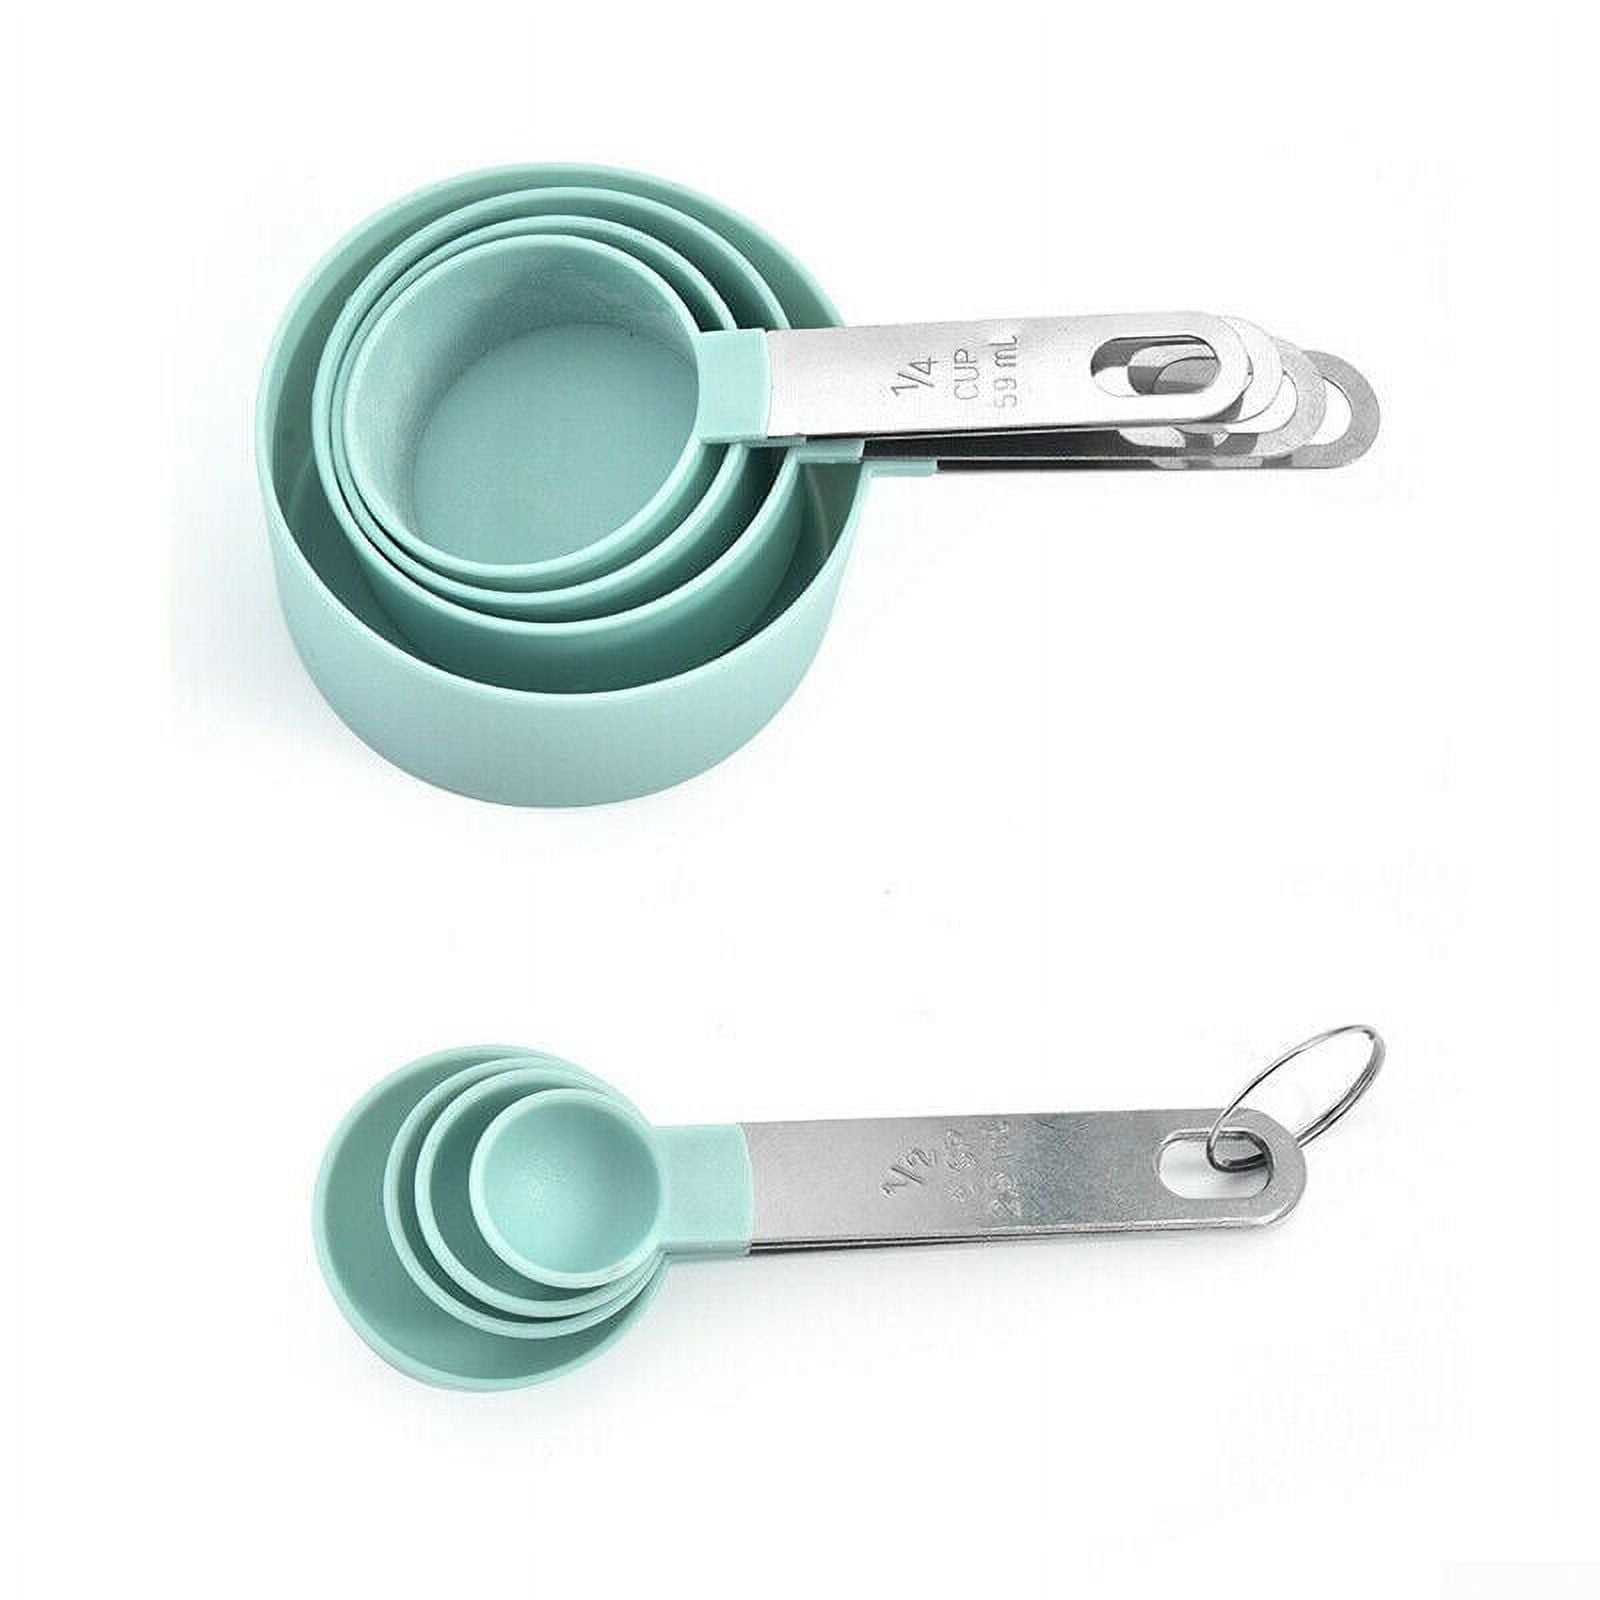 Stainless Steel Handle Pampered Chef Measuring Cups Plastic Measuring Spoon  Measuring Spoon Baking Set Kitchen Gadgets From Cl2020017, $3.34